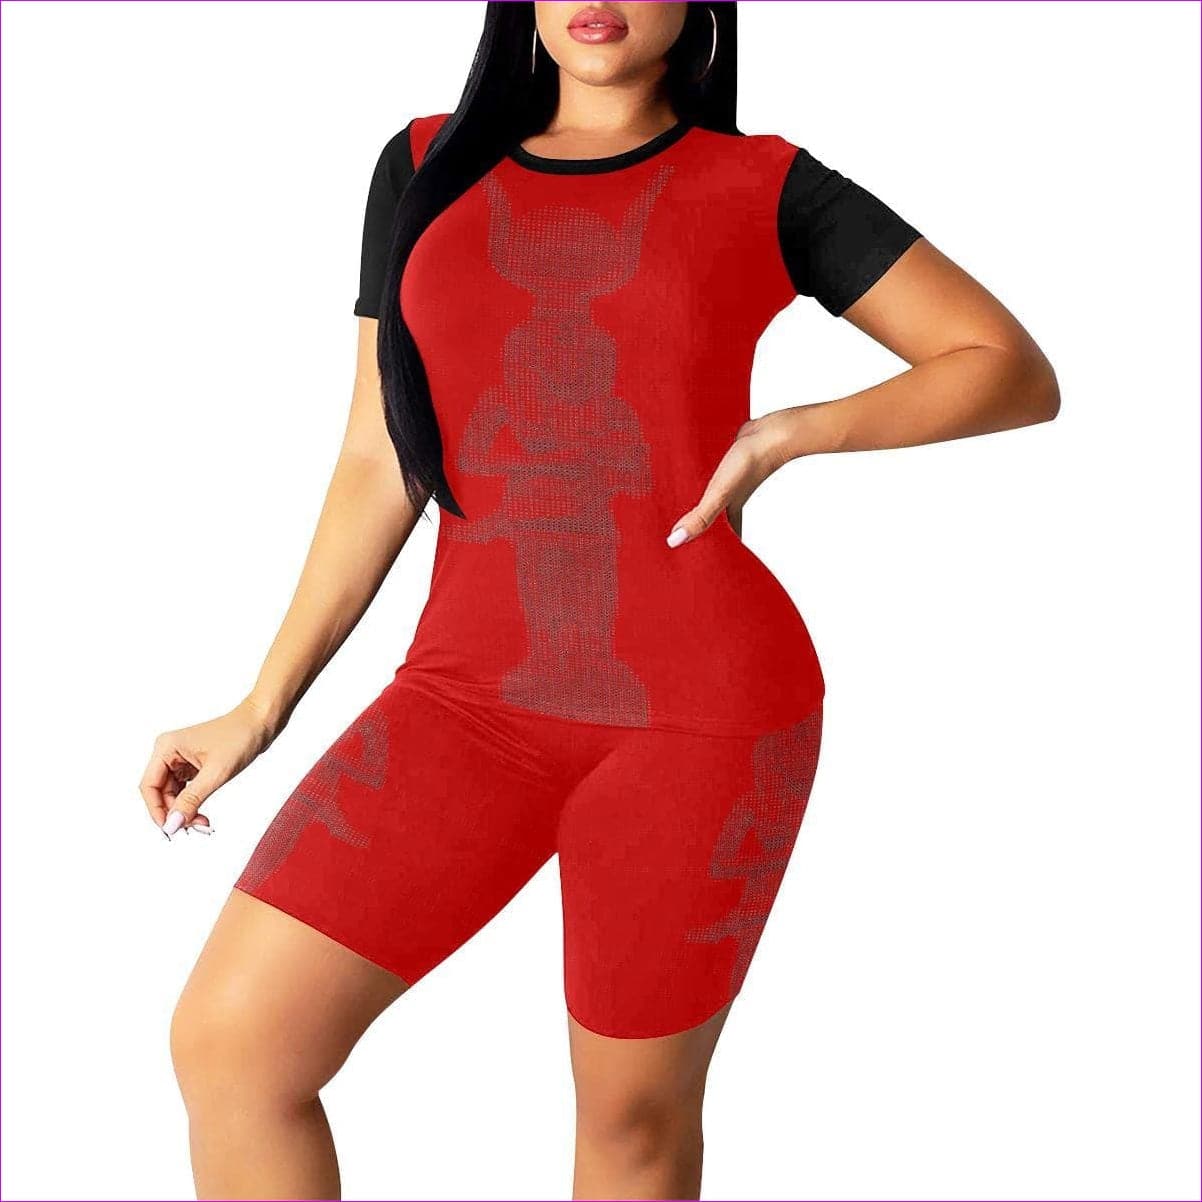 Isis - red Women's Short Yoga Set(Sets 03) Isis Womens Yoga Short Set - 6 colors - women's top & short set at TFC&H Co.